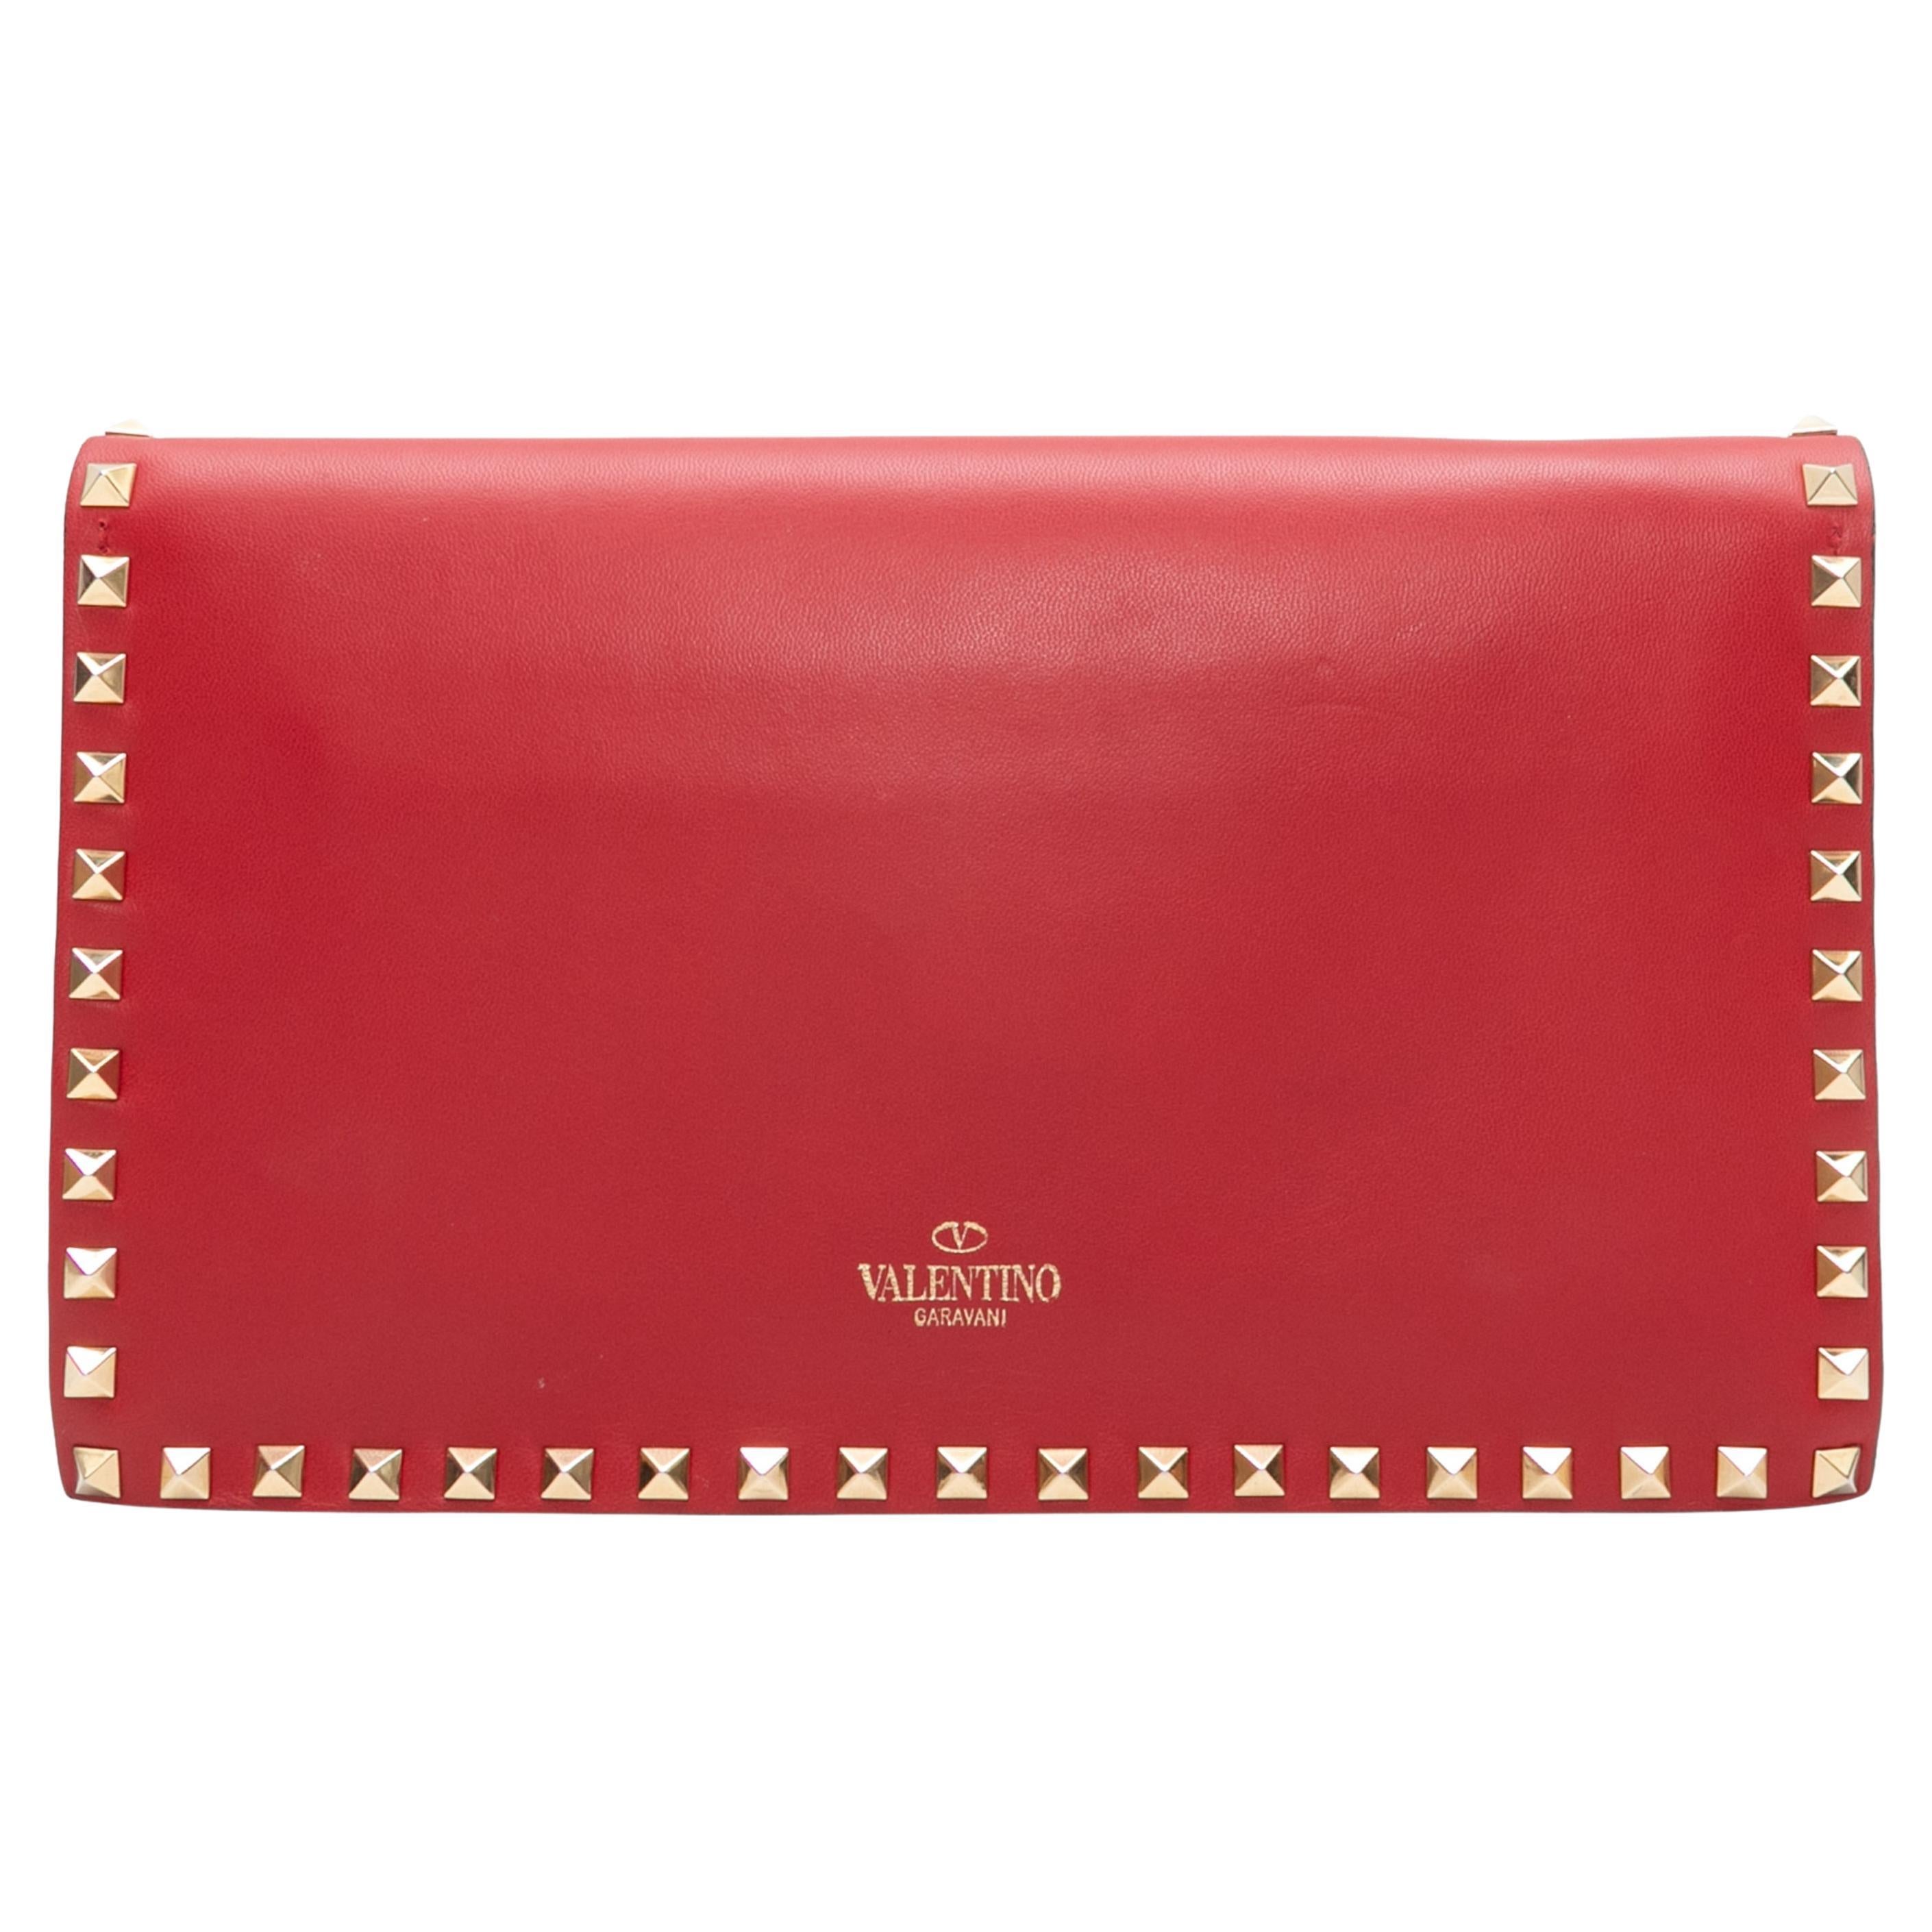 Red Valentino Rockstud Clutch For Sale